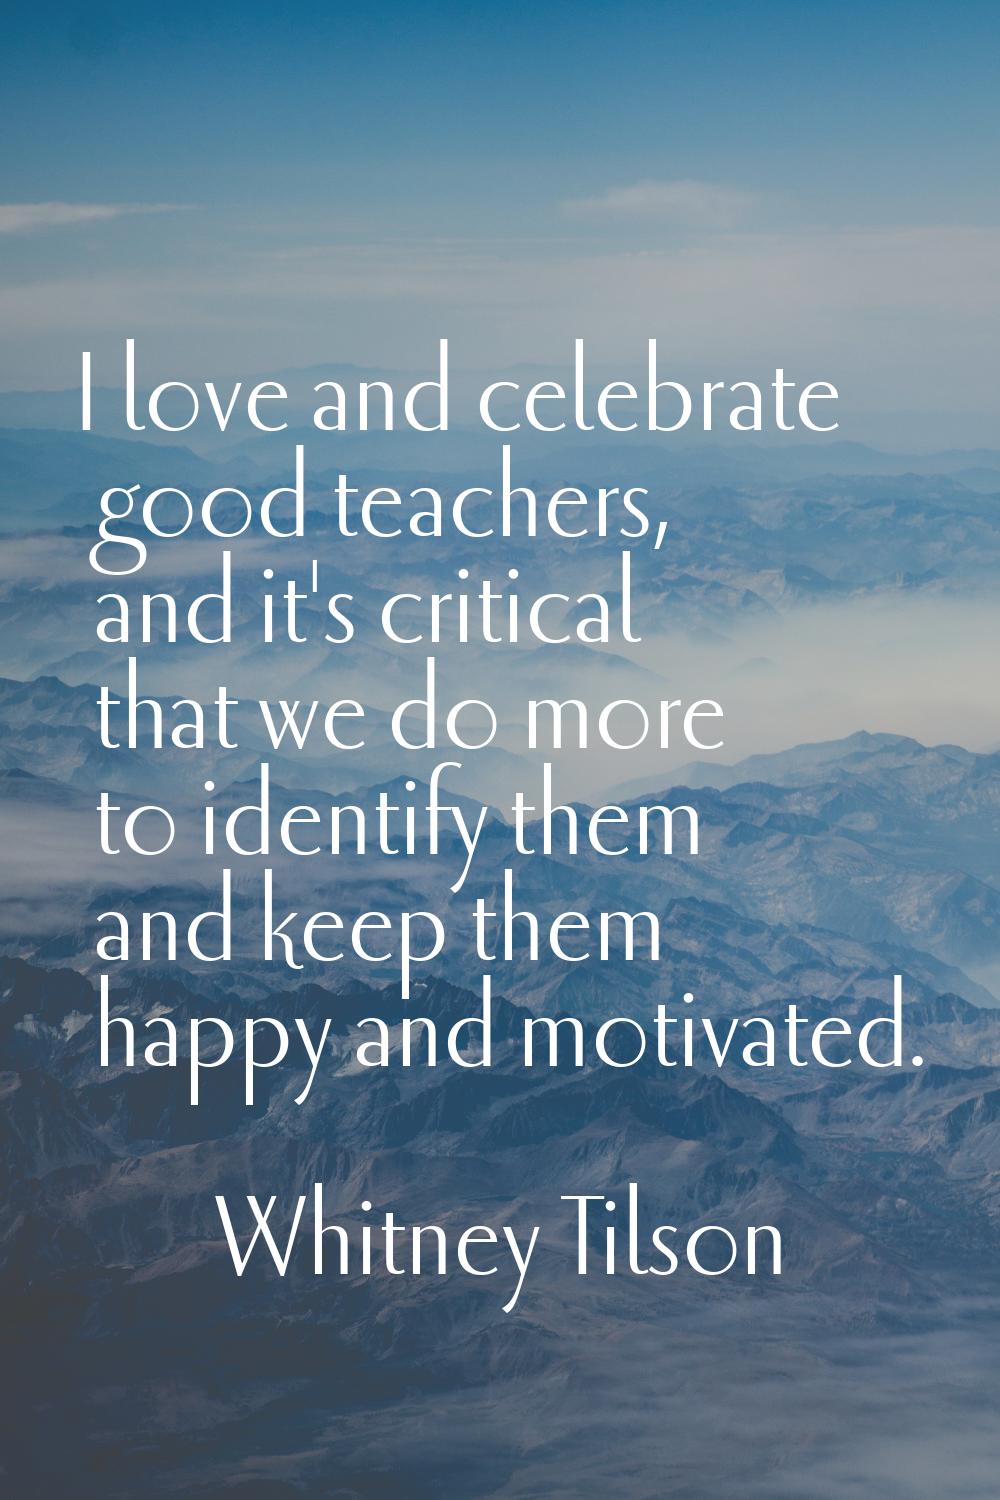 I love and celebrate good teachers, and it's critical that we do more to identify them and keep the